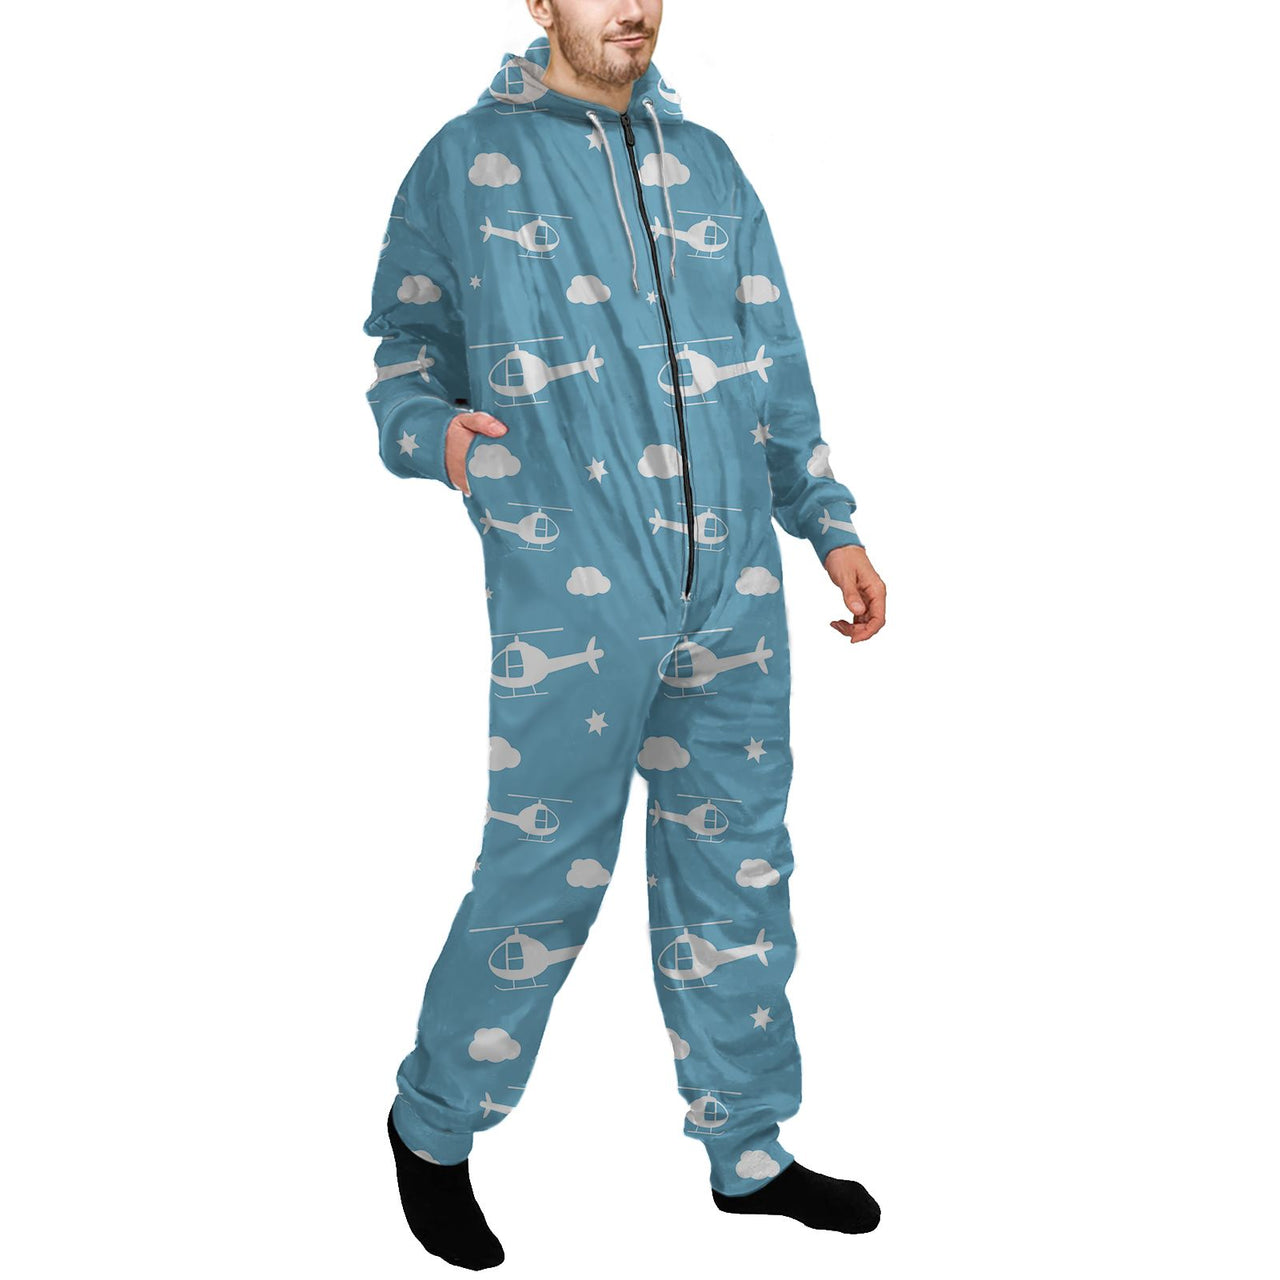 Helicopters & Clouds Designed Jumpsuit for Men & Women